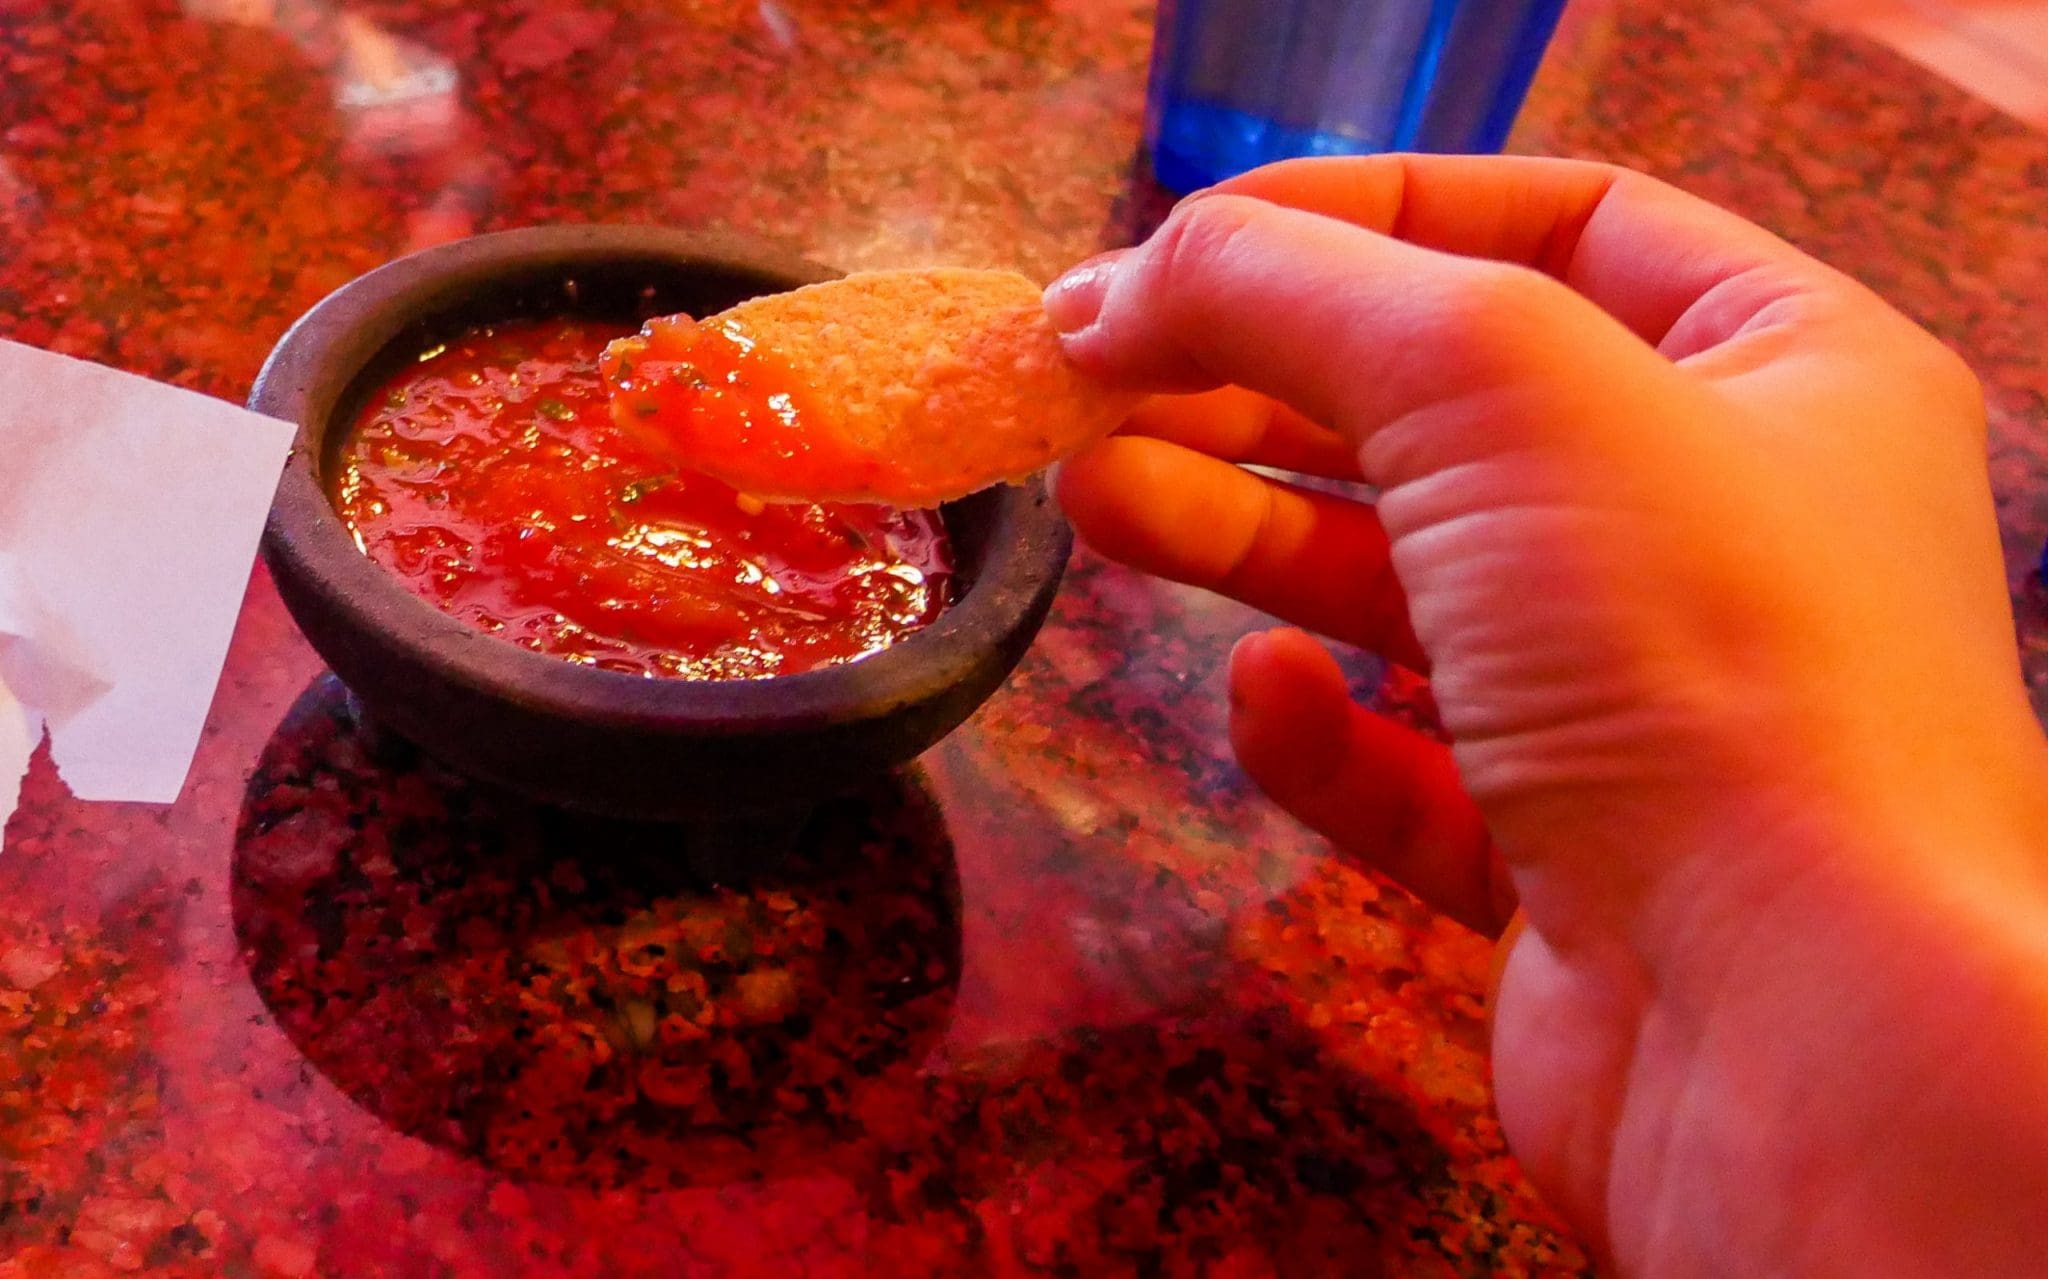 A round tortilla chip being dipped in a salsa dip on the Venice Beach Secret Food Tour